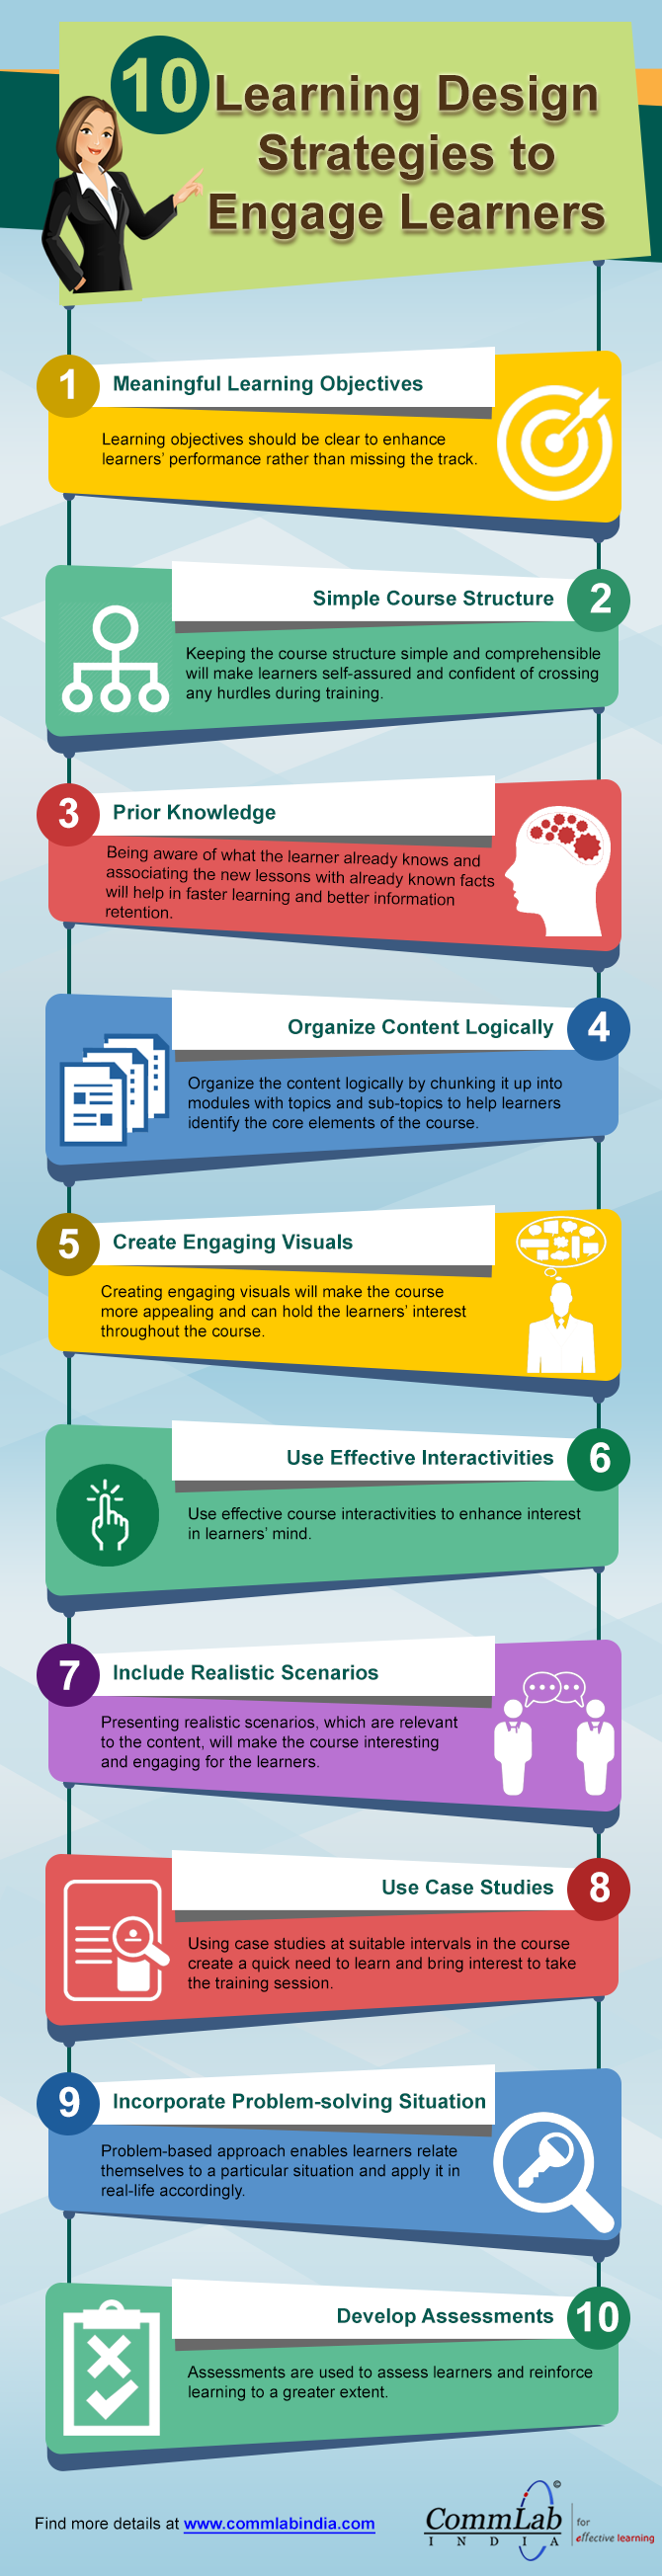 10 Learning Design Strategies to Engage Learners [Infographic]